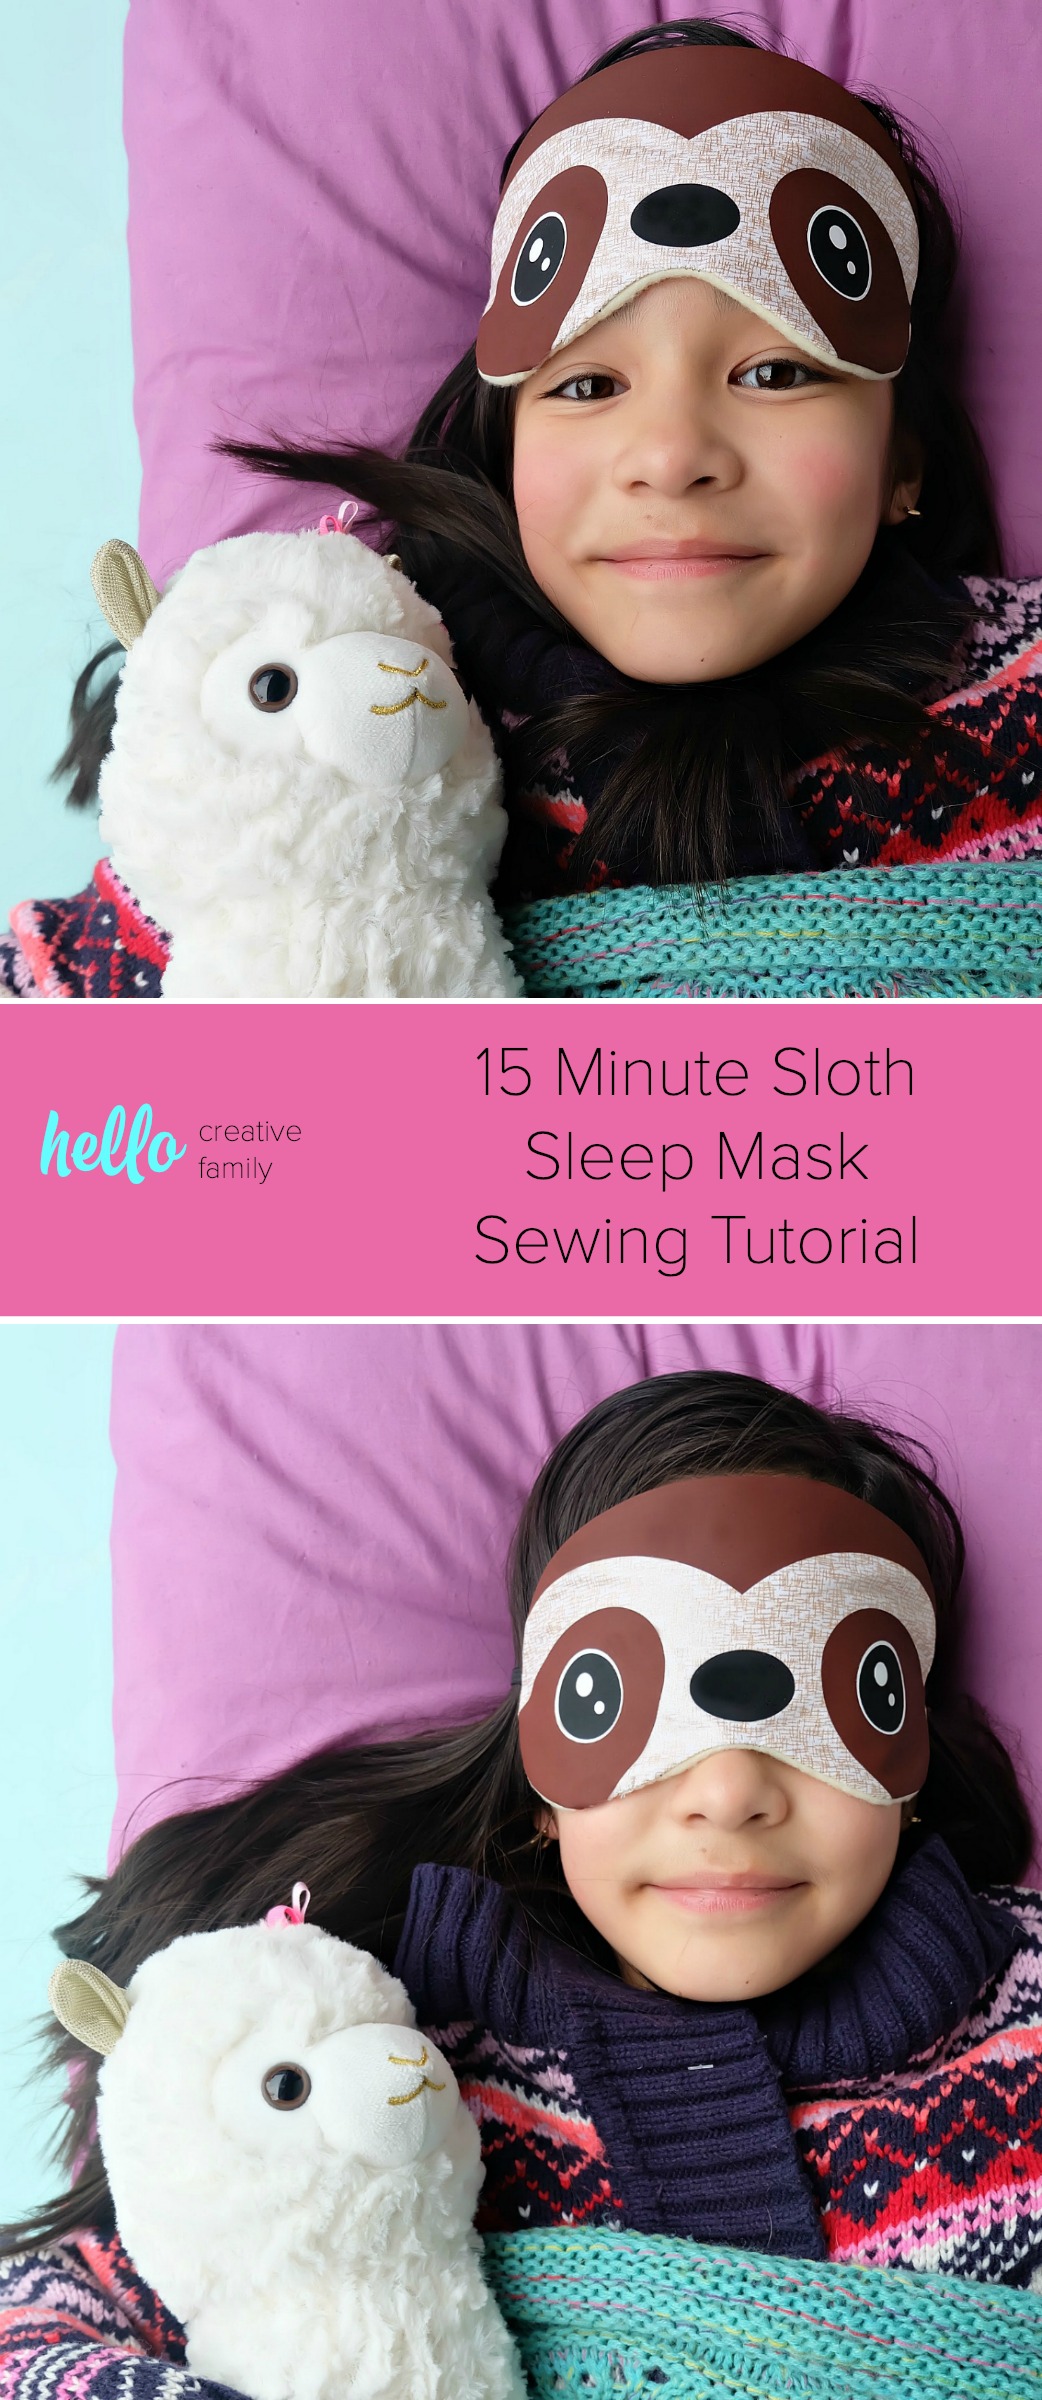 This DIY Sloth Sleep Mask is so stinking cute! Bonus you can make it in just 15 minutes using your Cricut Maker or Cricut Explore. Such a fun and easy Cricut Project! #Cricut #CricutProject #HandmadeGift #Sloth